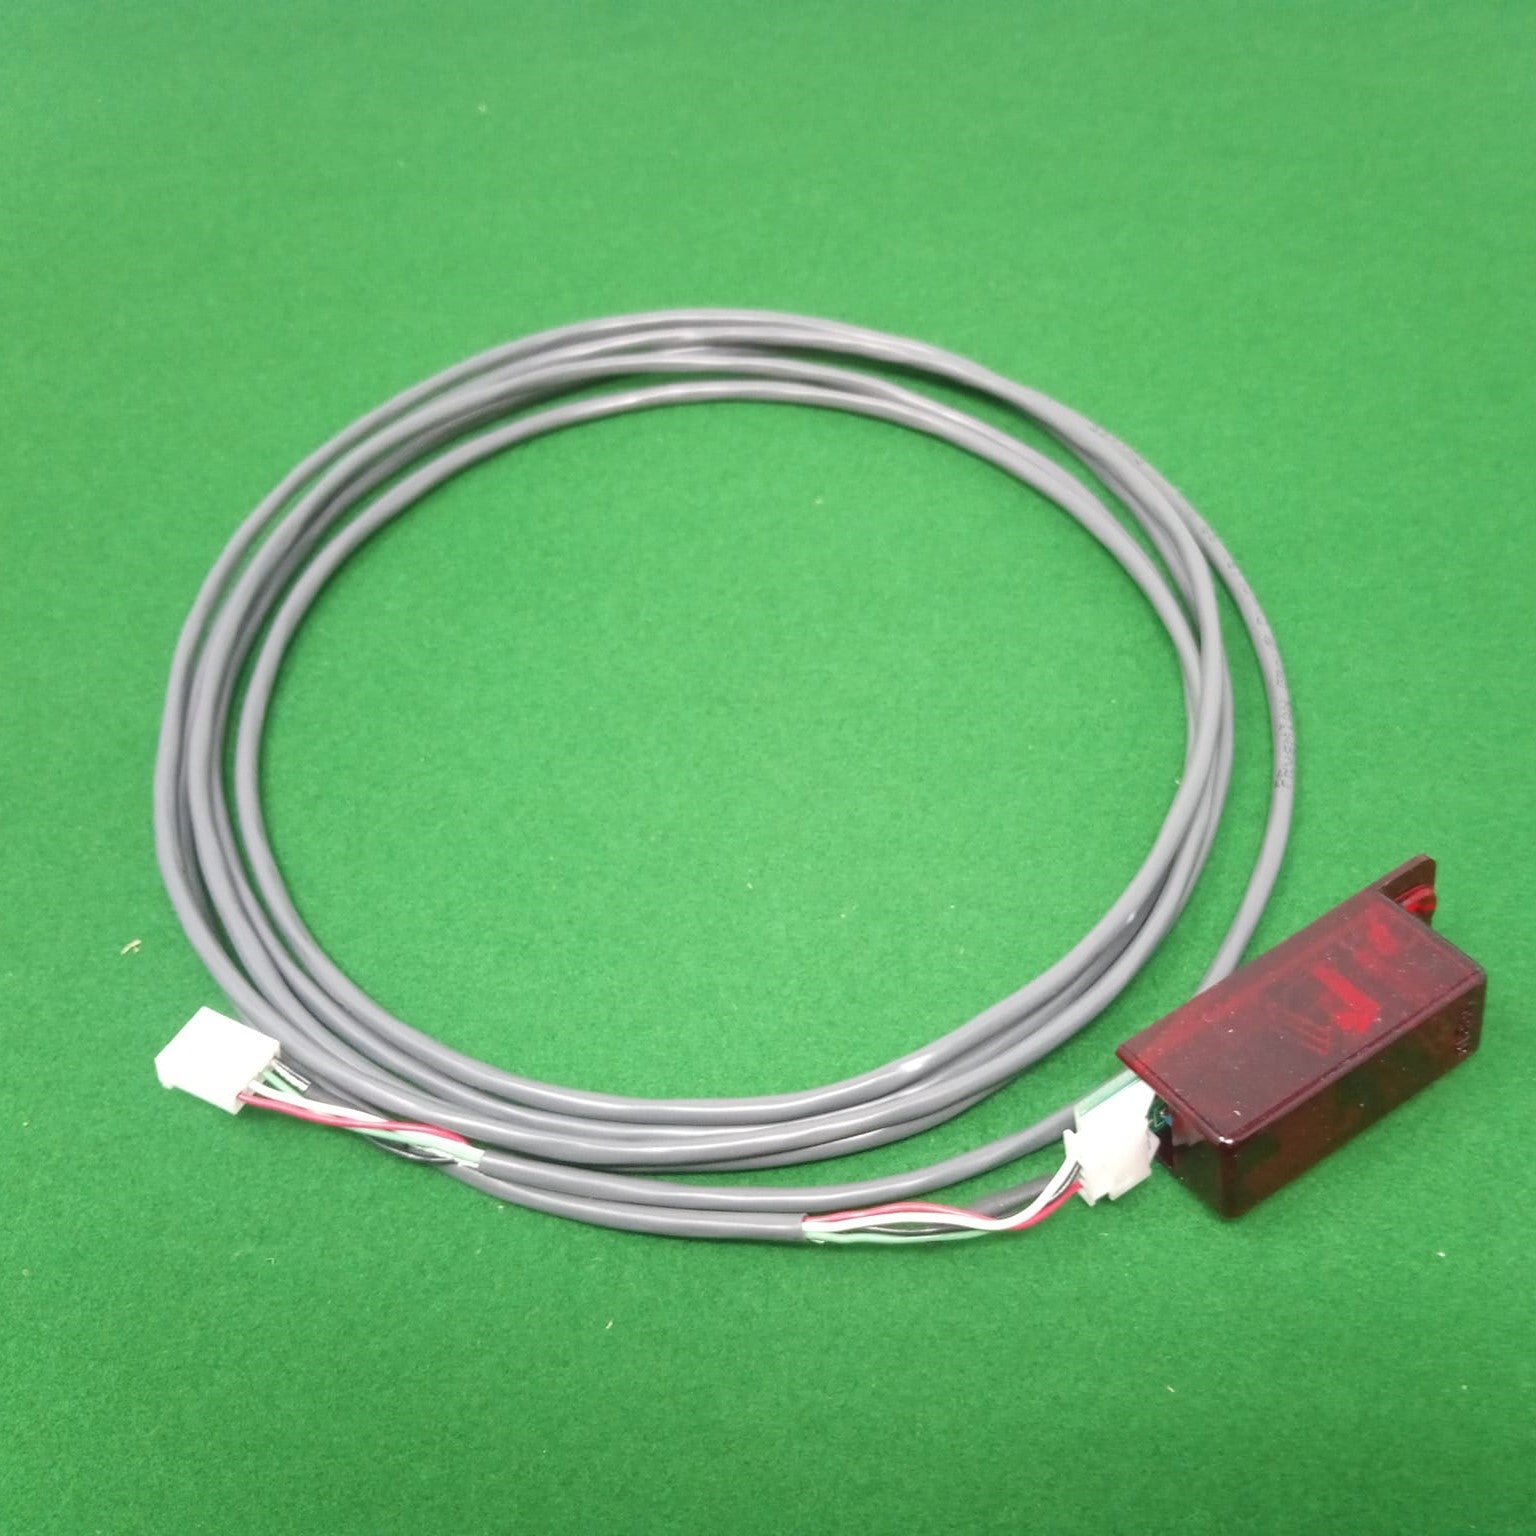 IR Remote Detector & Cable Assembly